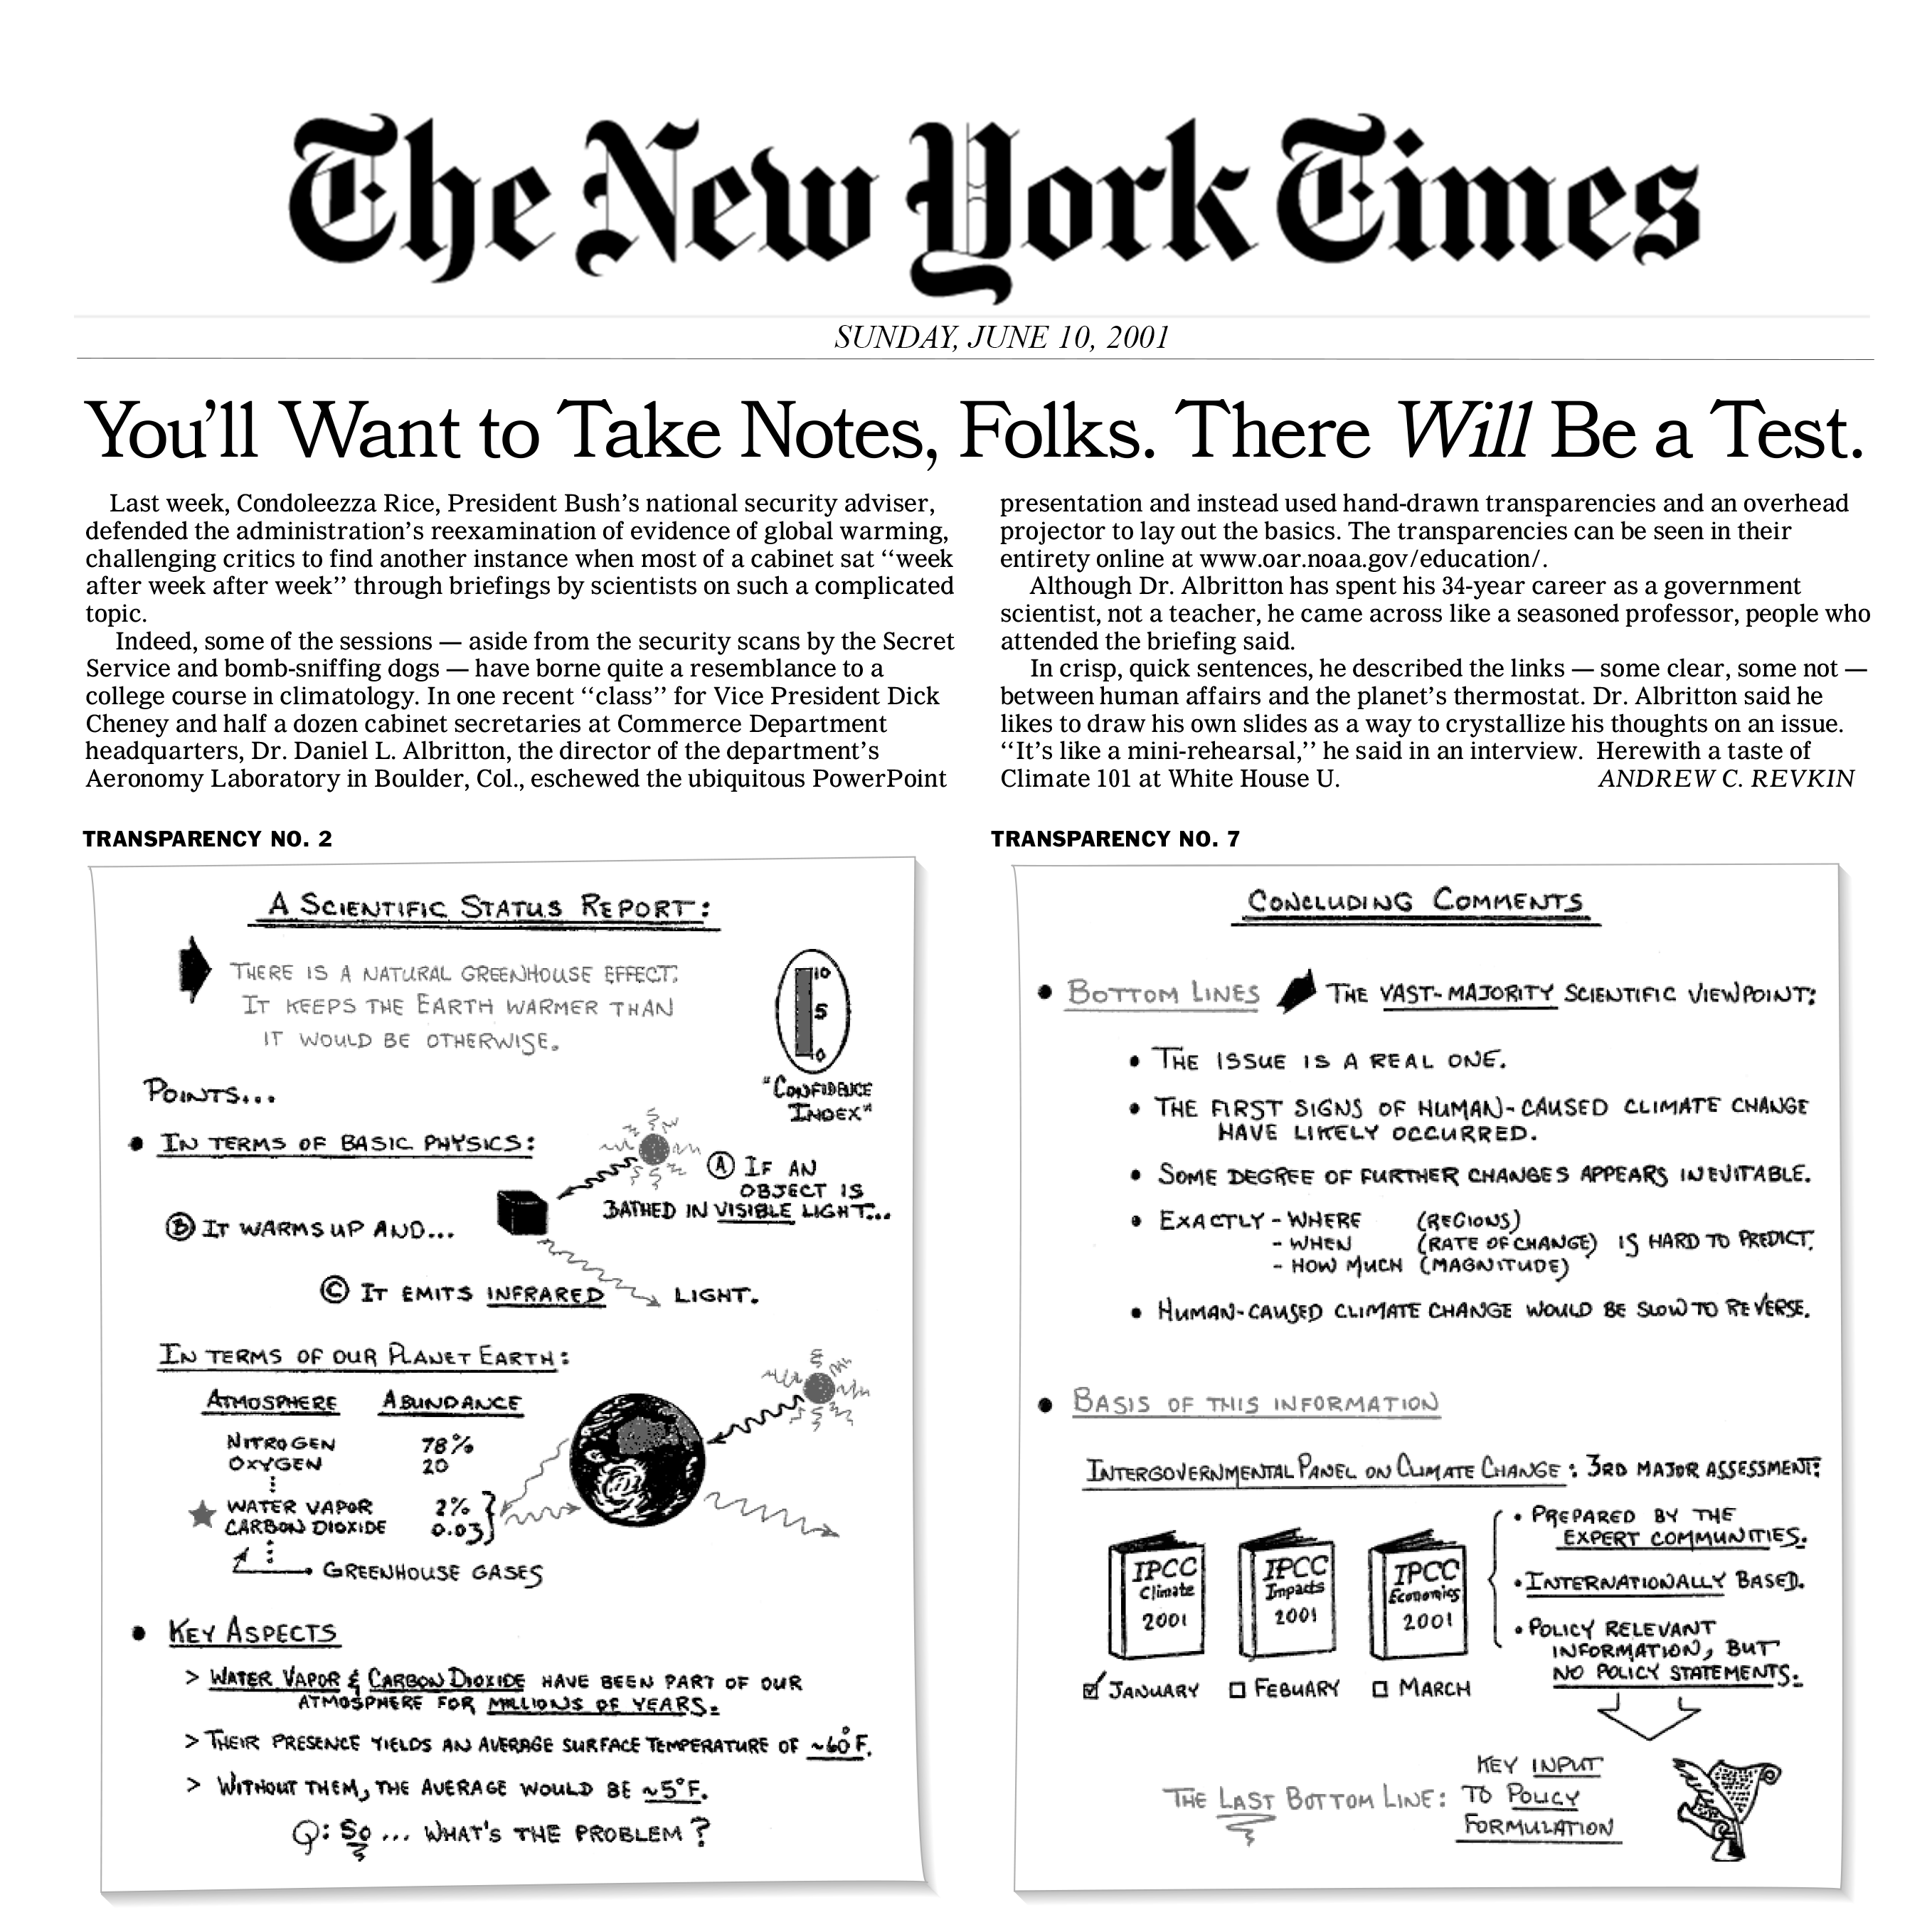 10 June 2001 NYT article